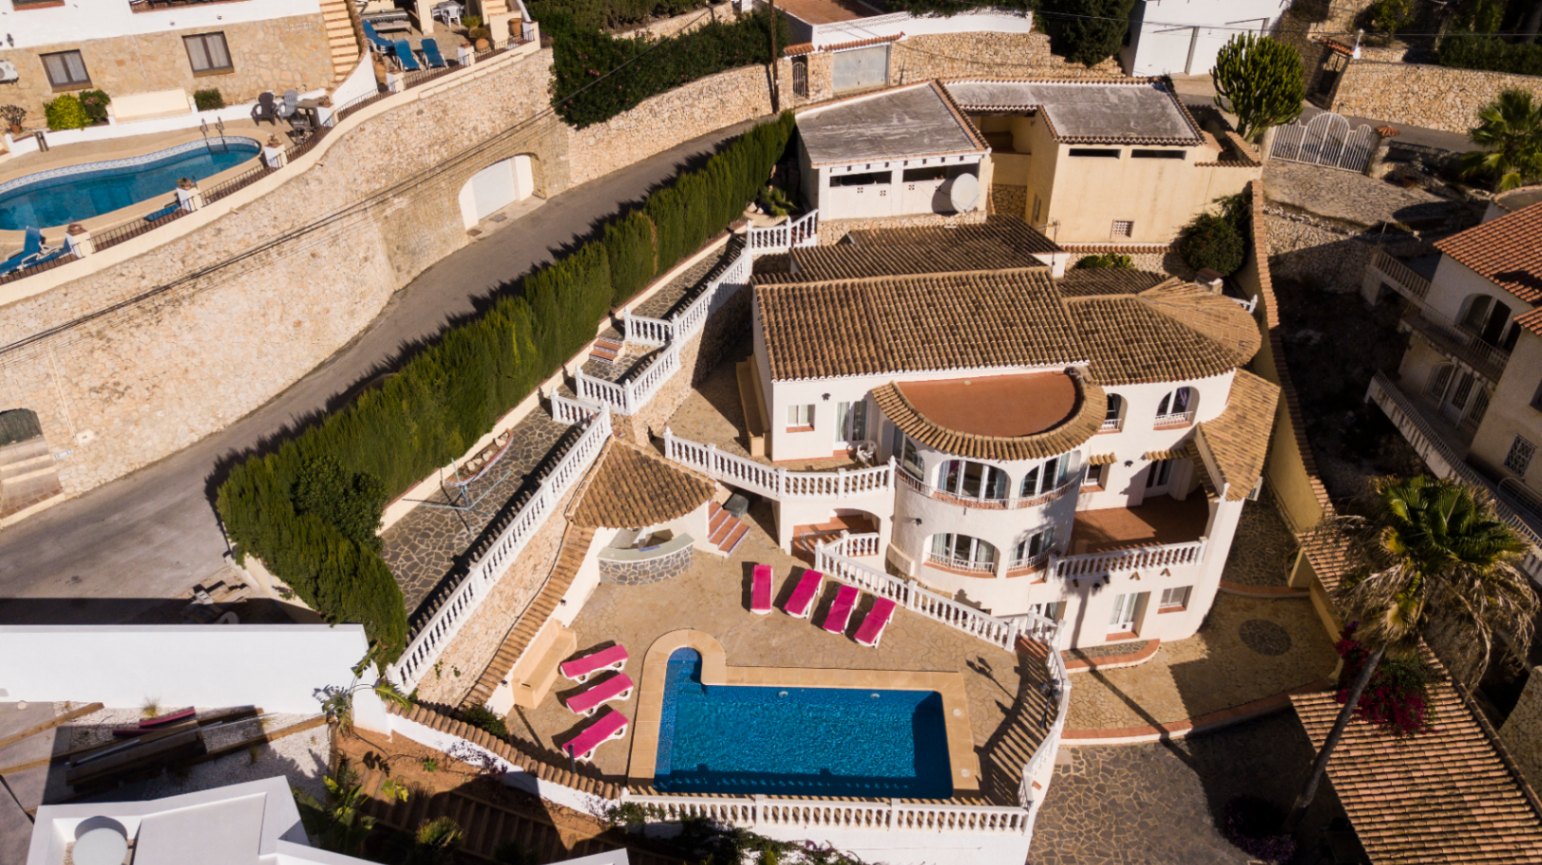 Villa with sea view comprising 3 flats for sale in Benissa